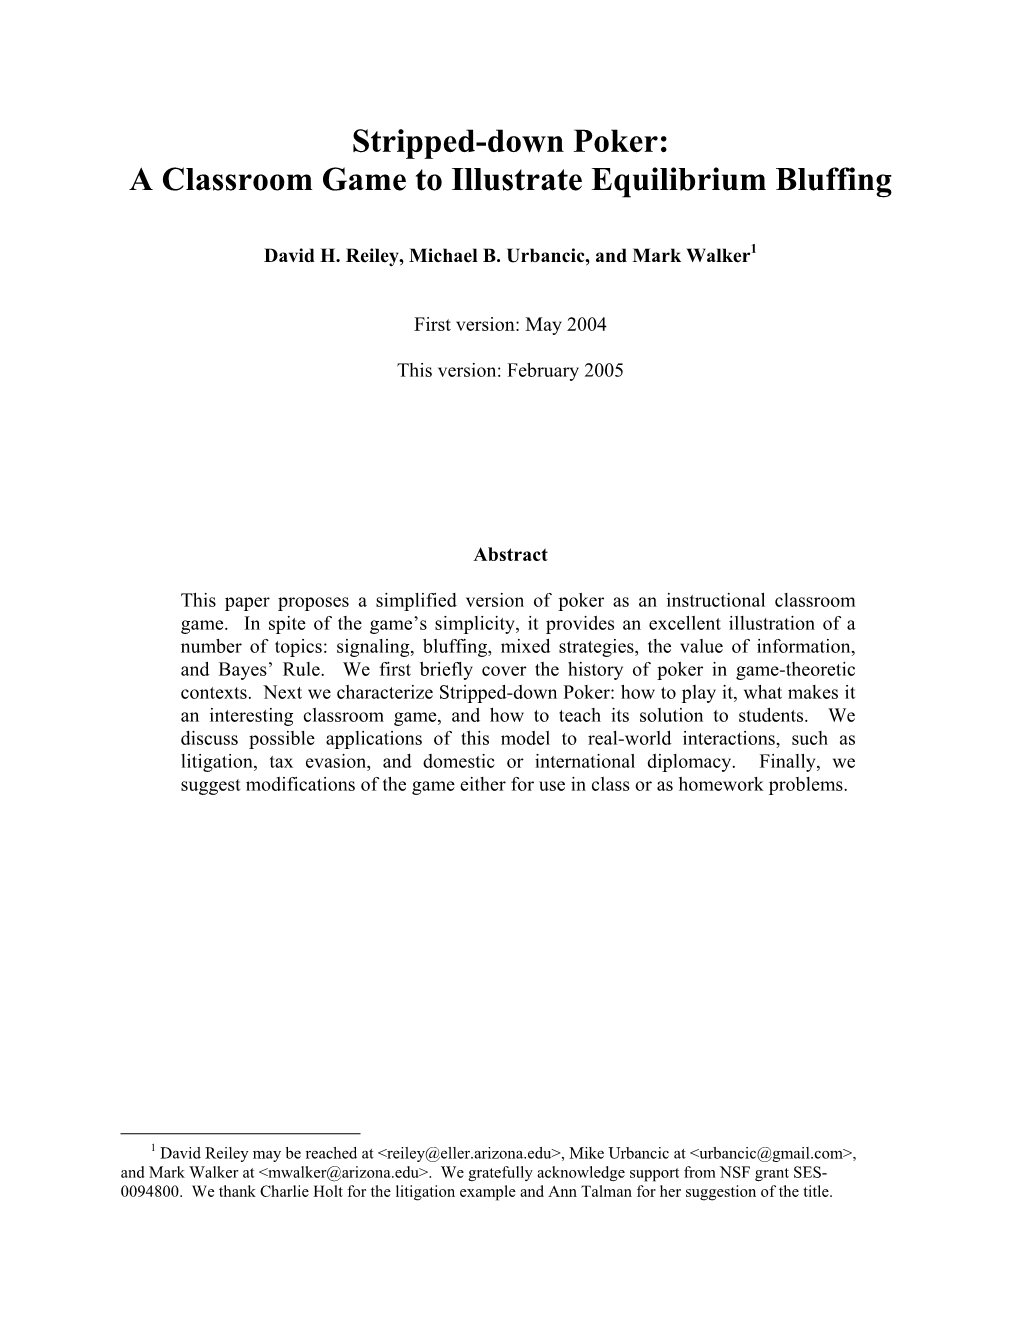 Stripped-Down Poker: a Classroom Game to Illustrate Equilibrium Bluffing